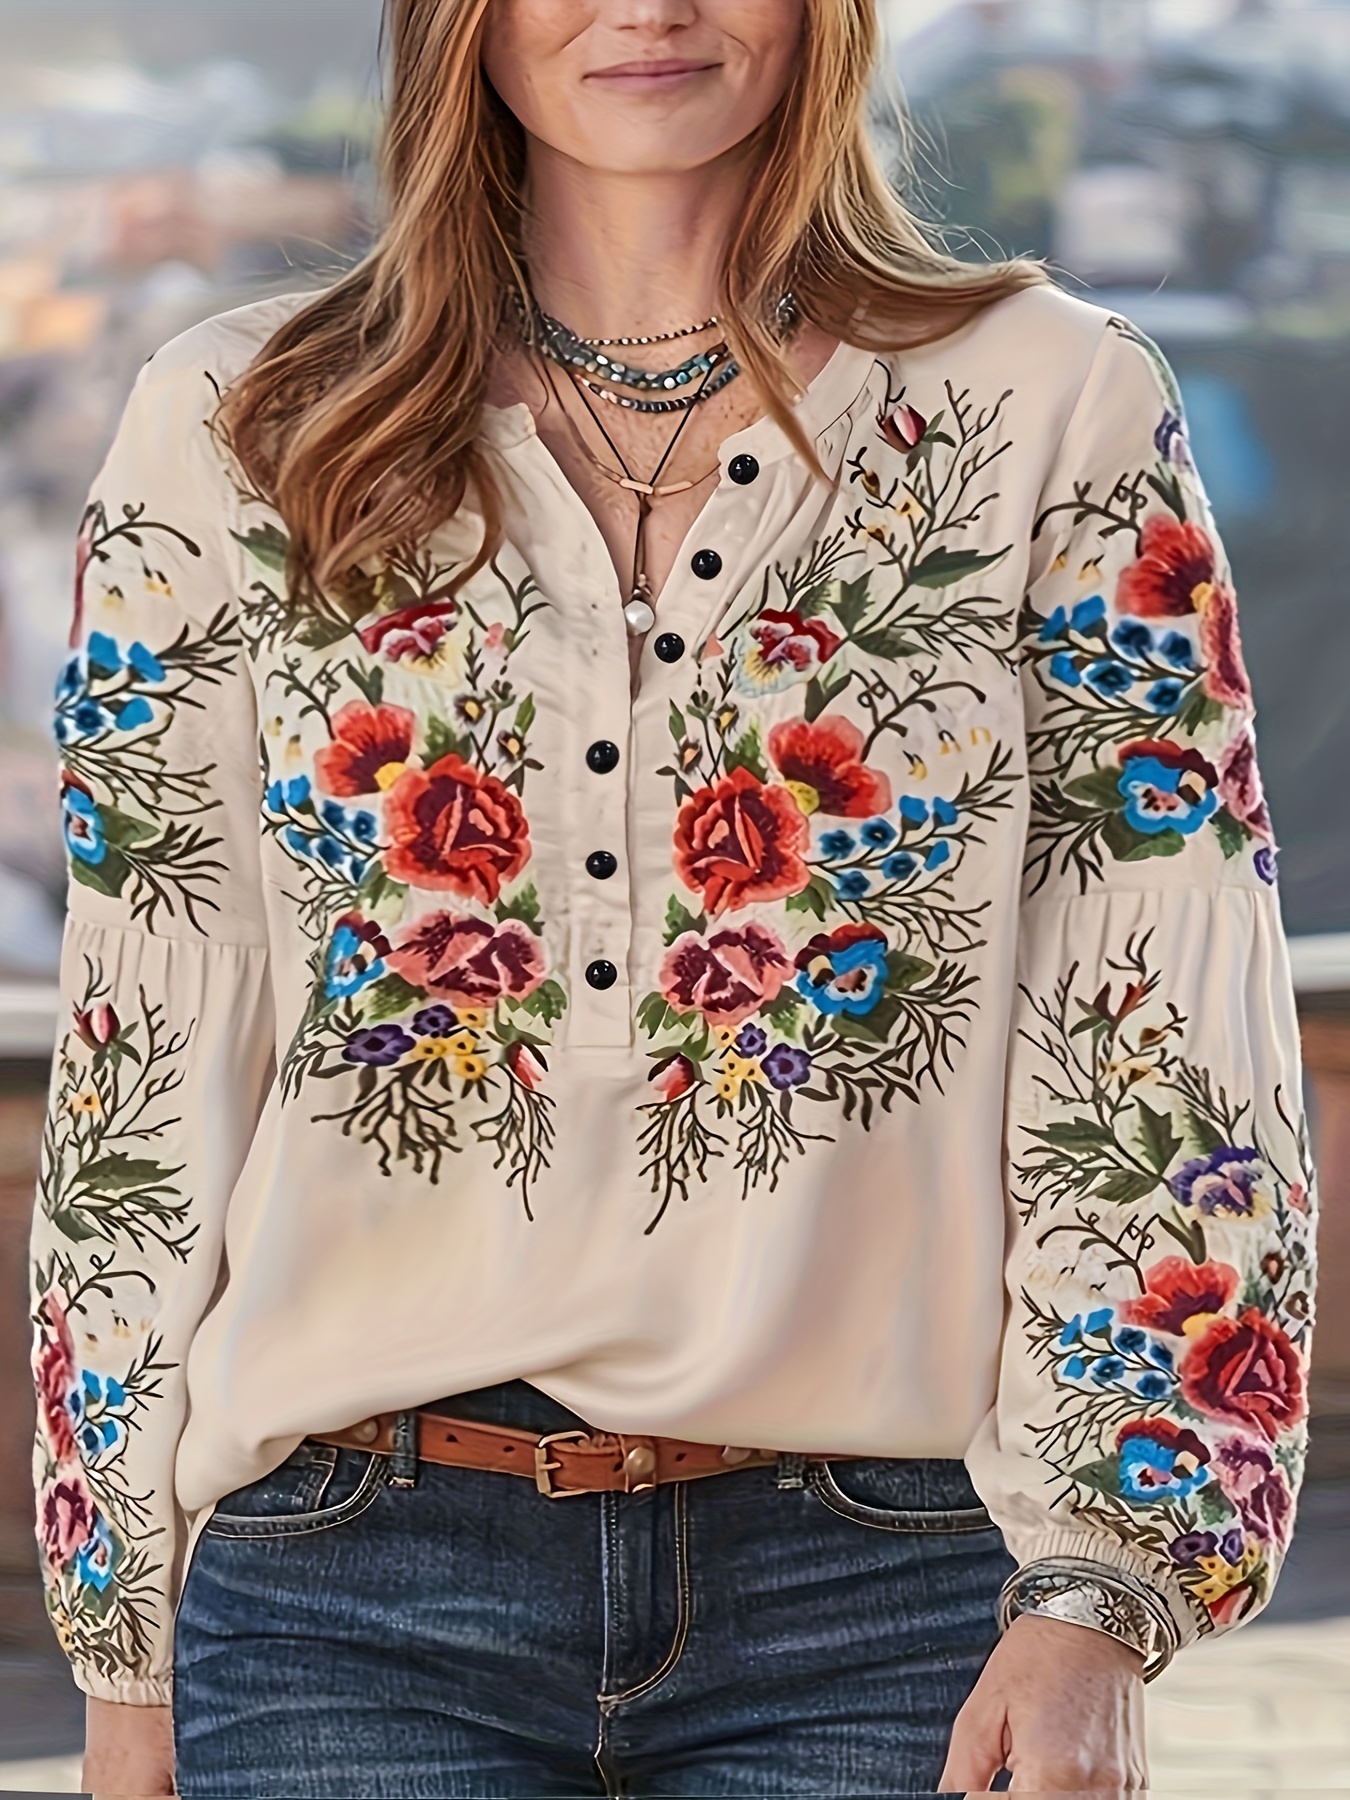 Shop Embroidered Short Sleeve Top with Round Neck and Frill Detail